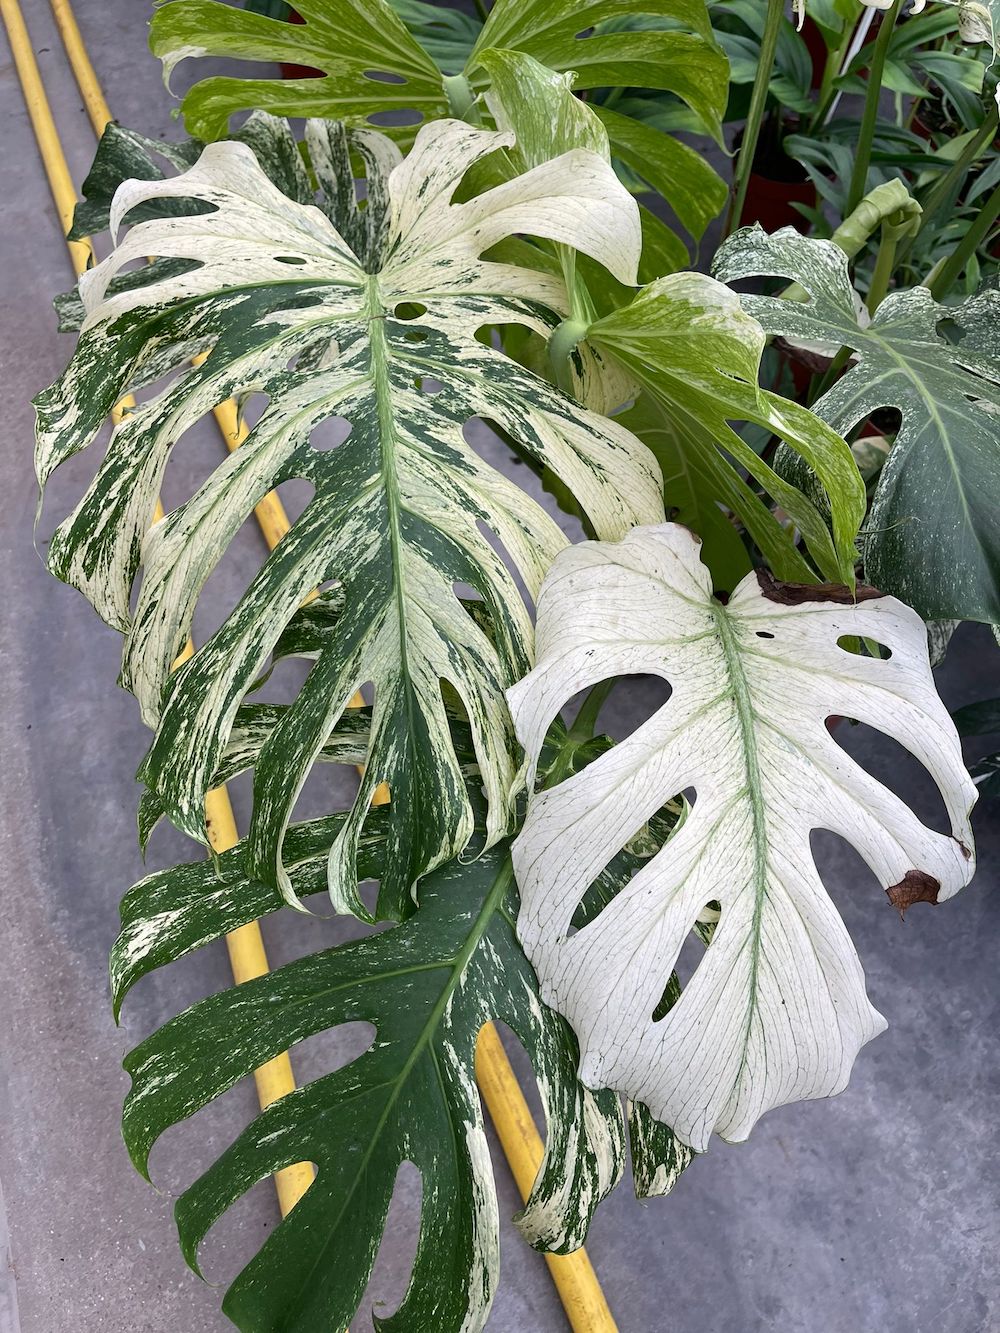 Monstera Deliciosa Mint Variegated - A Rare Houseplant You'll Want to Have